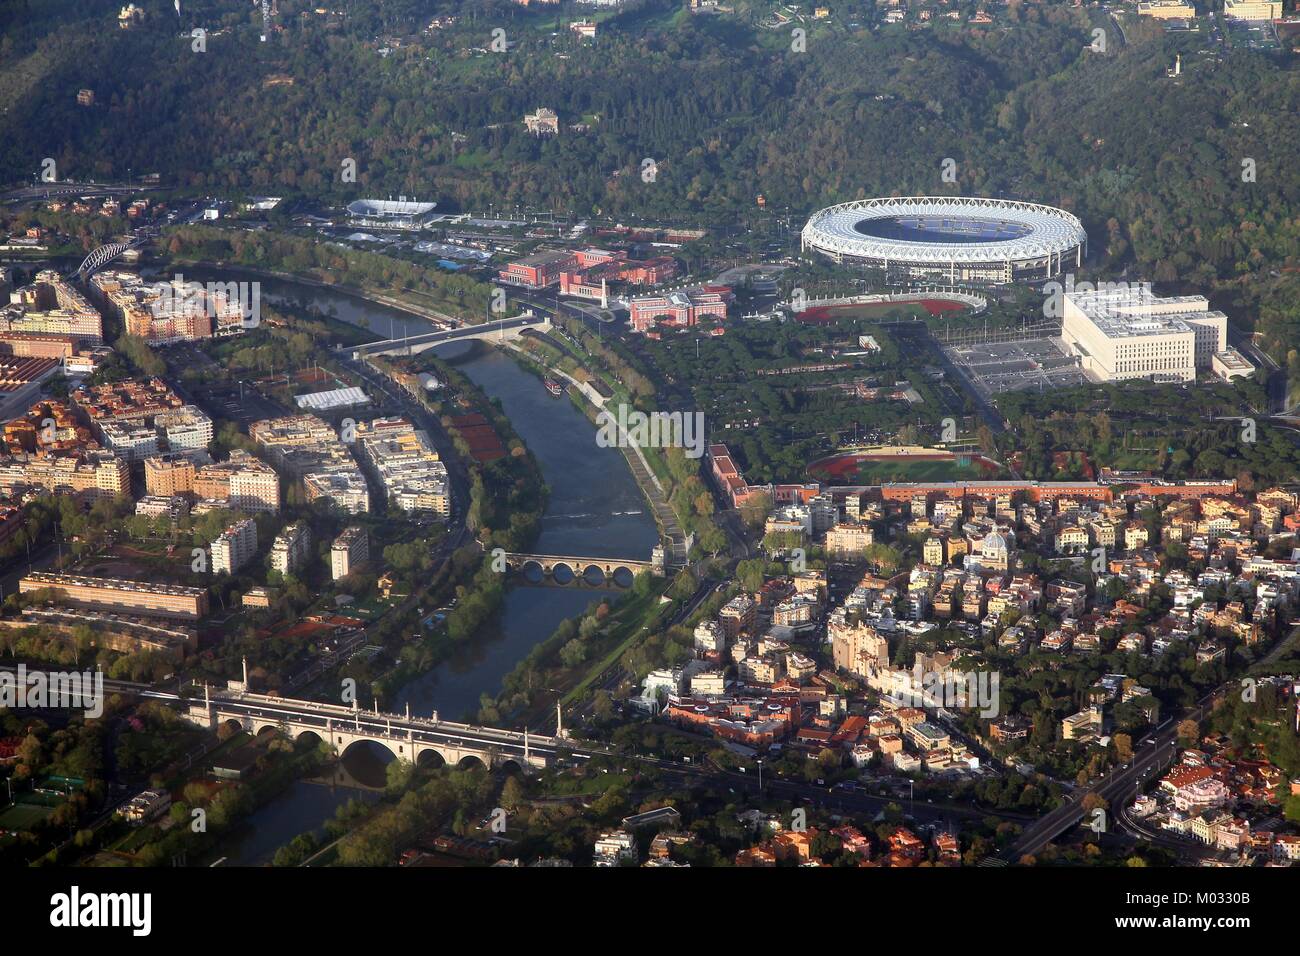 Rome, Italy - aerial view with Tiber river and famous stadium. Stock Photo